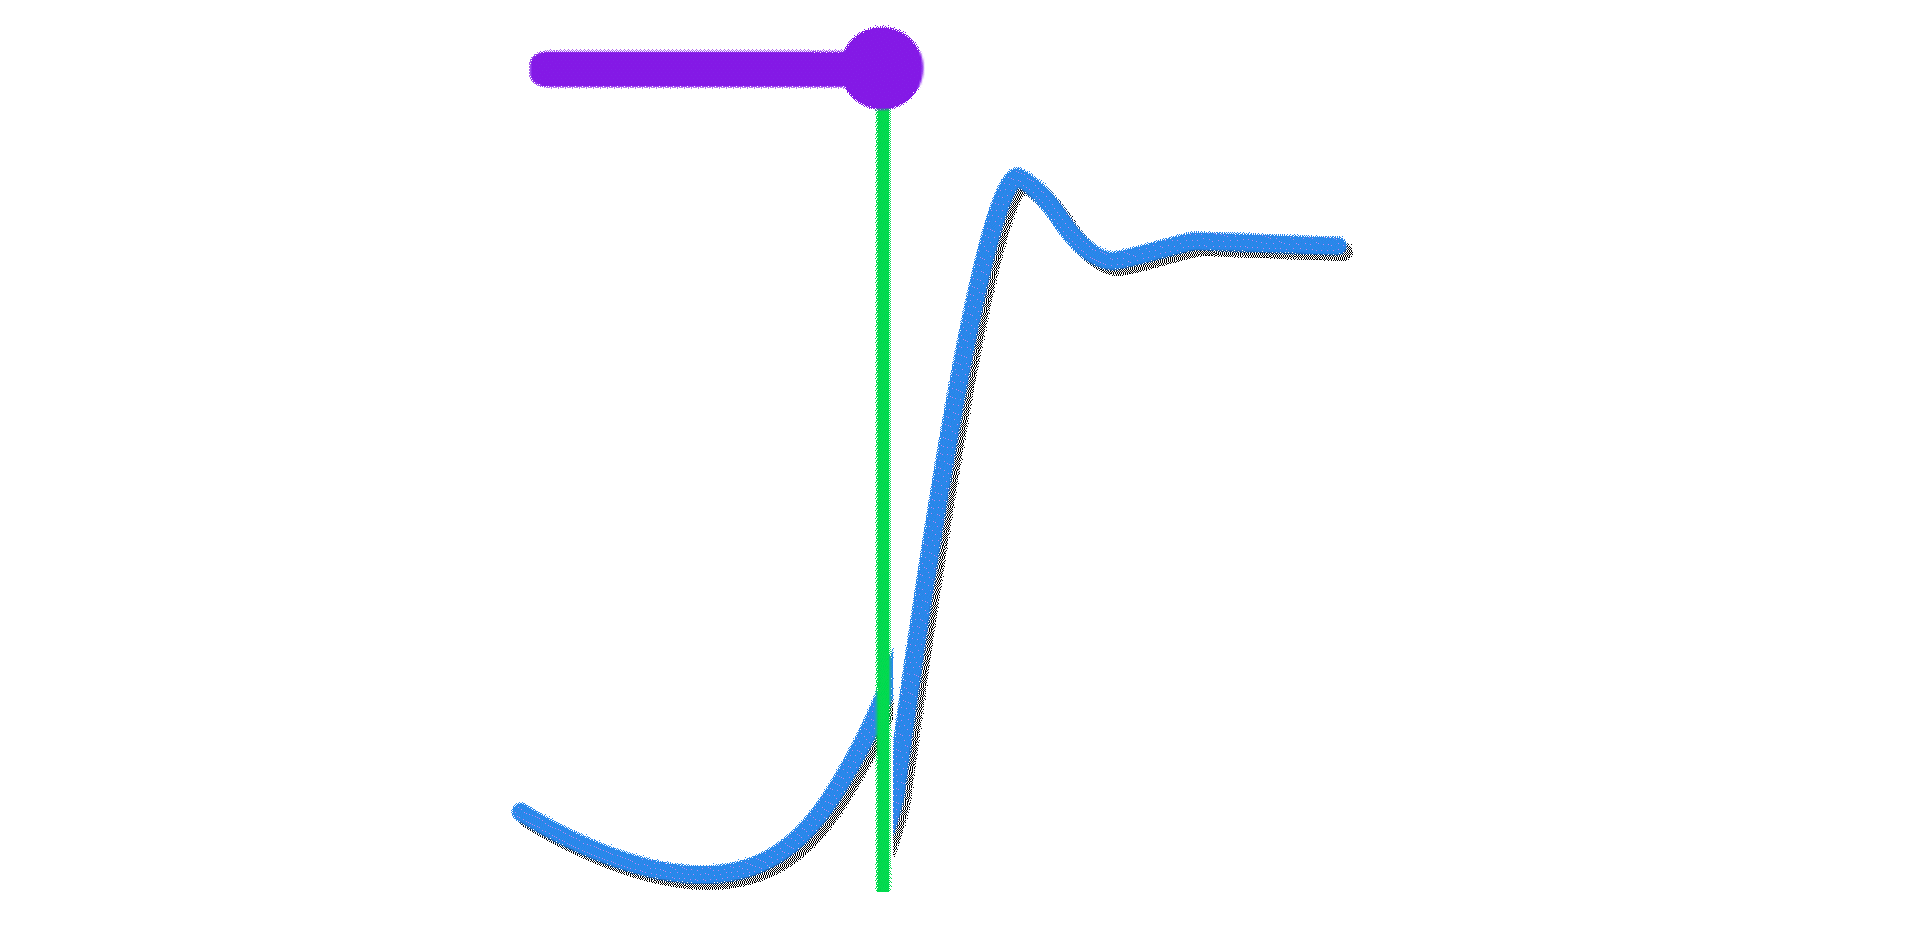 easing graphs combination